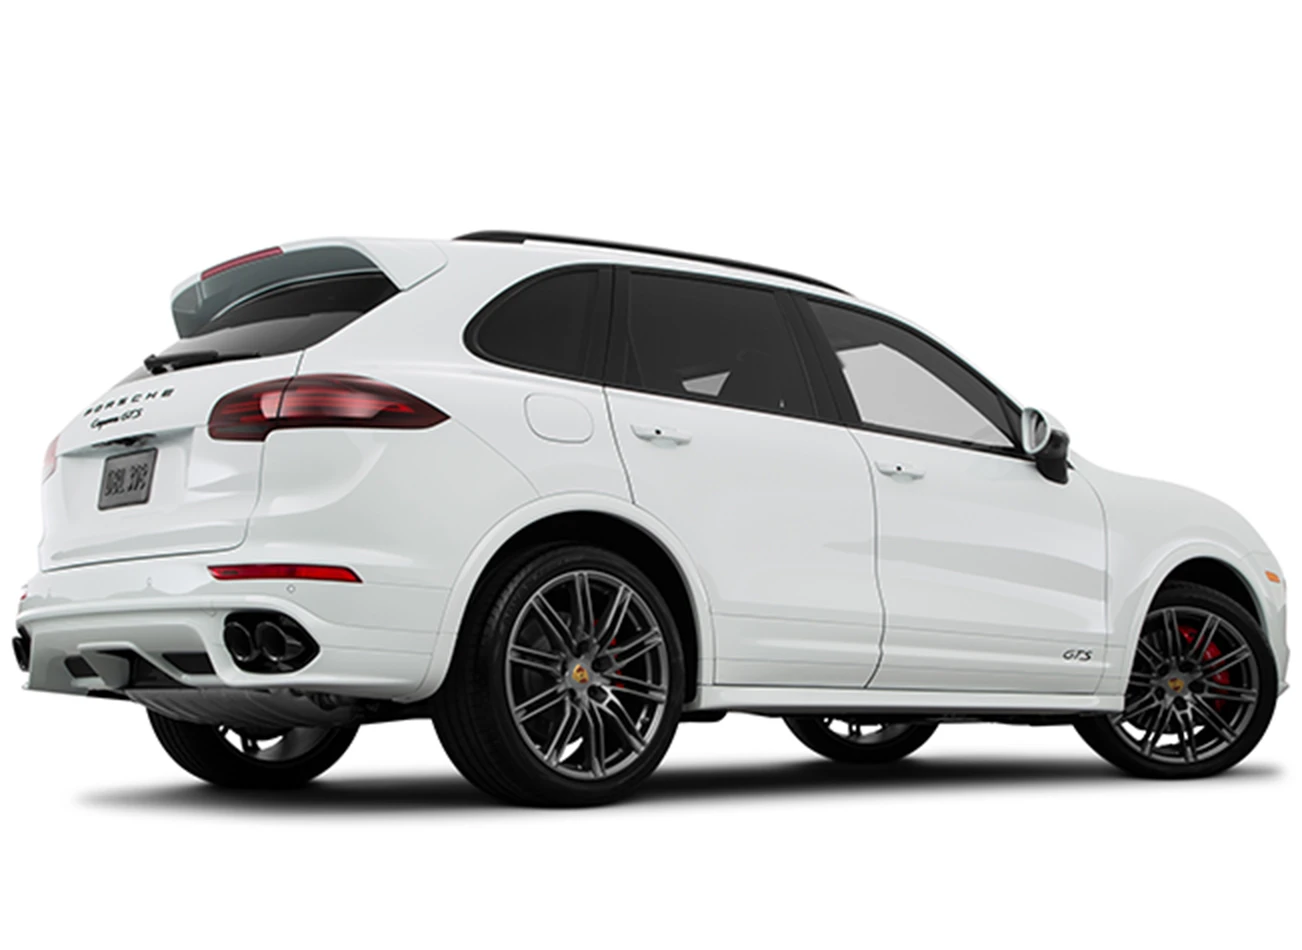 2016 Porsche Cayenne: Reviews, Photos, and More: Reasons to Buy #2 | CarMax